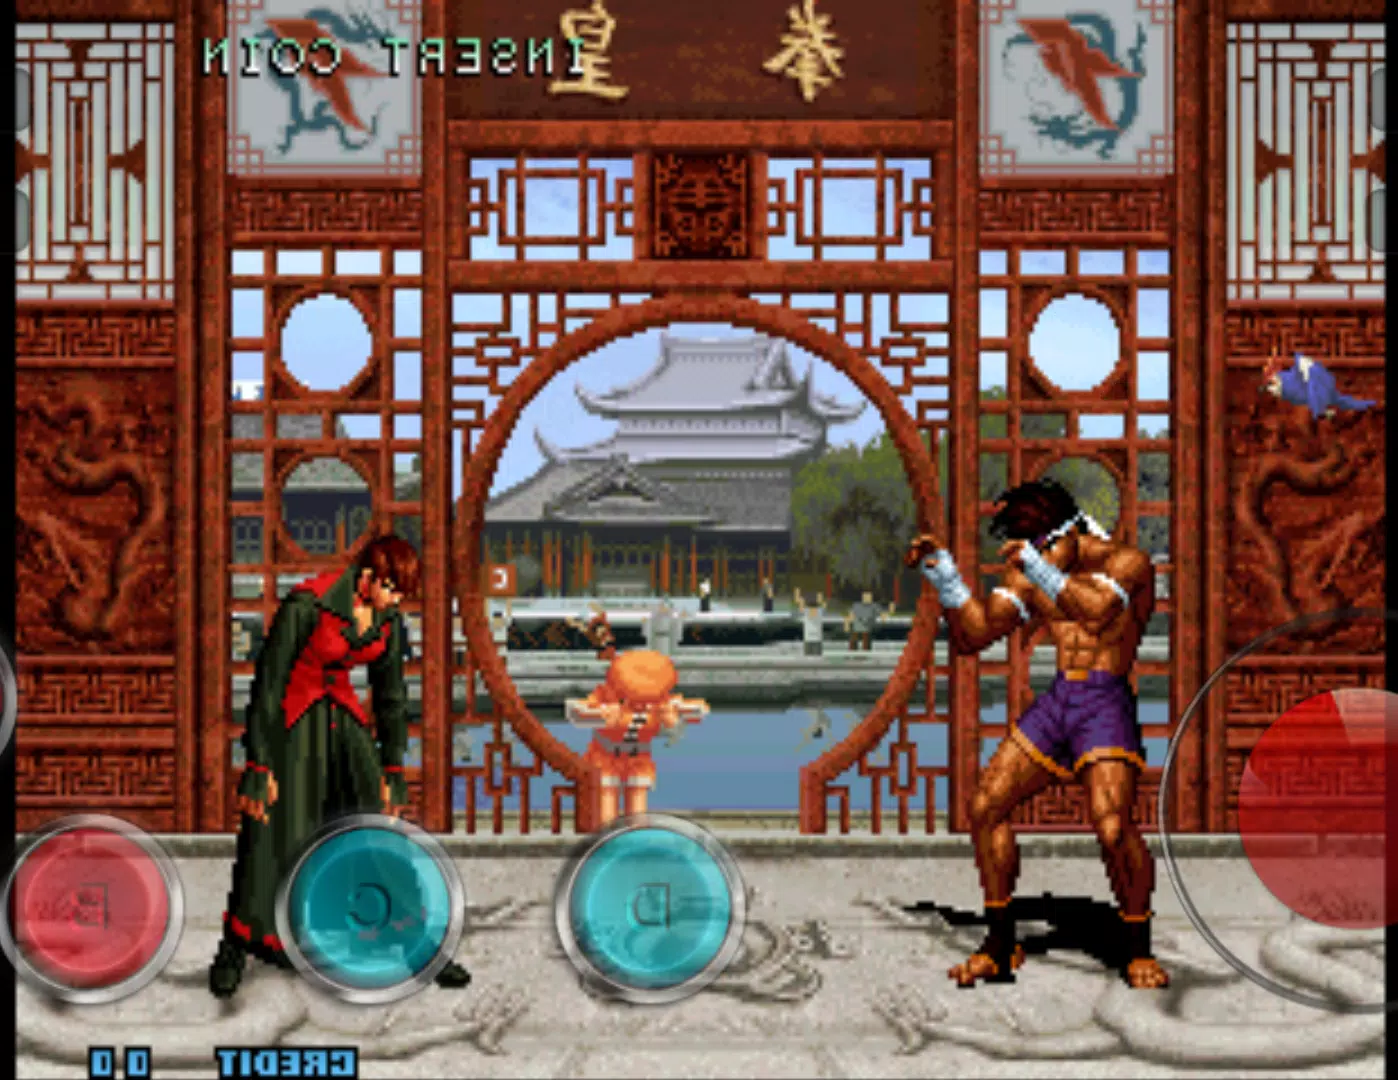 Arcade KOF-Fighter 2002 Magic-Plus APK (Android Game) - Free Download